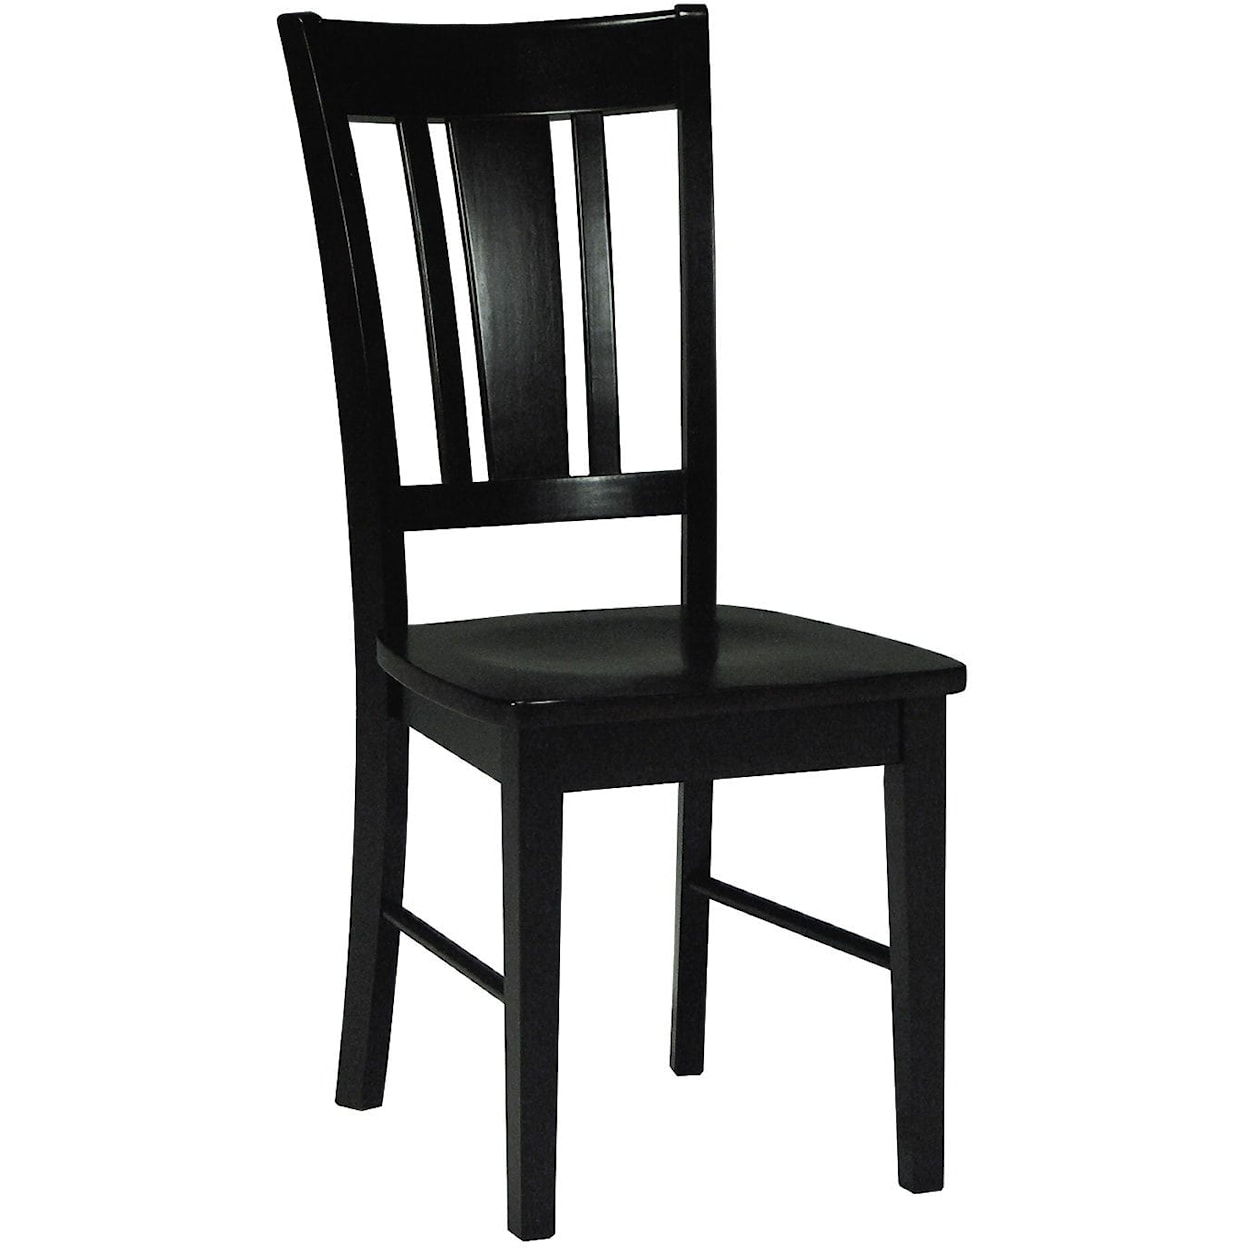 John Thomas Dining Essentials San Remo Side Chair in Black